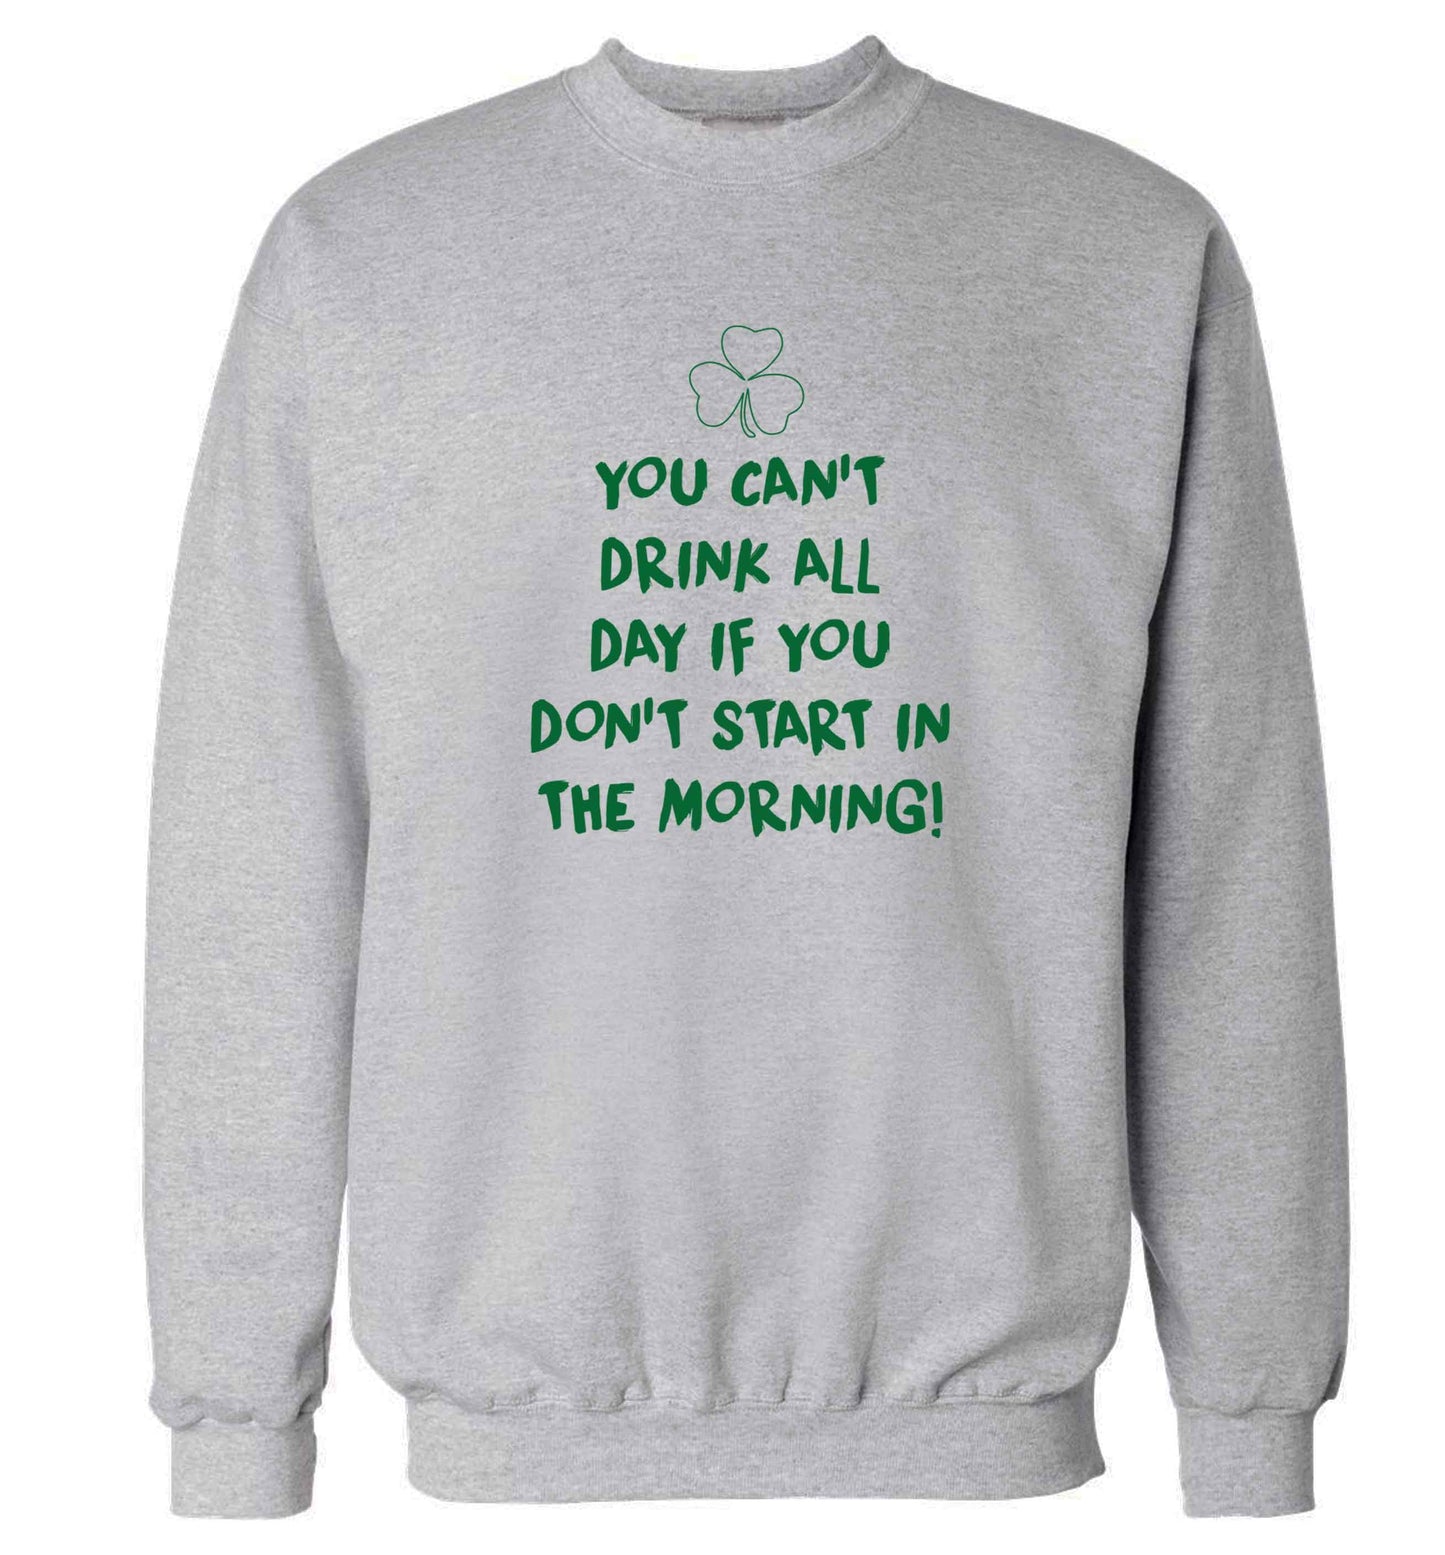 You can't drink all day if you don't start in the morning adult's unisex grey sweater 2XL